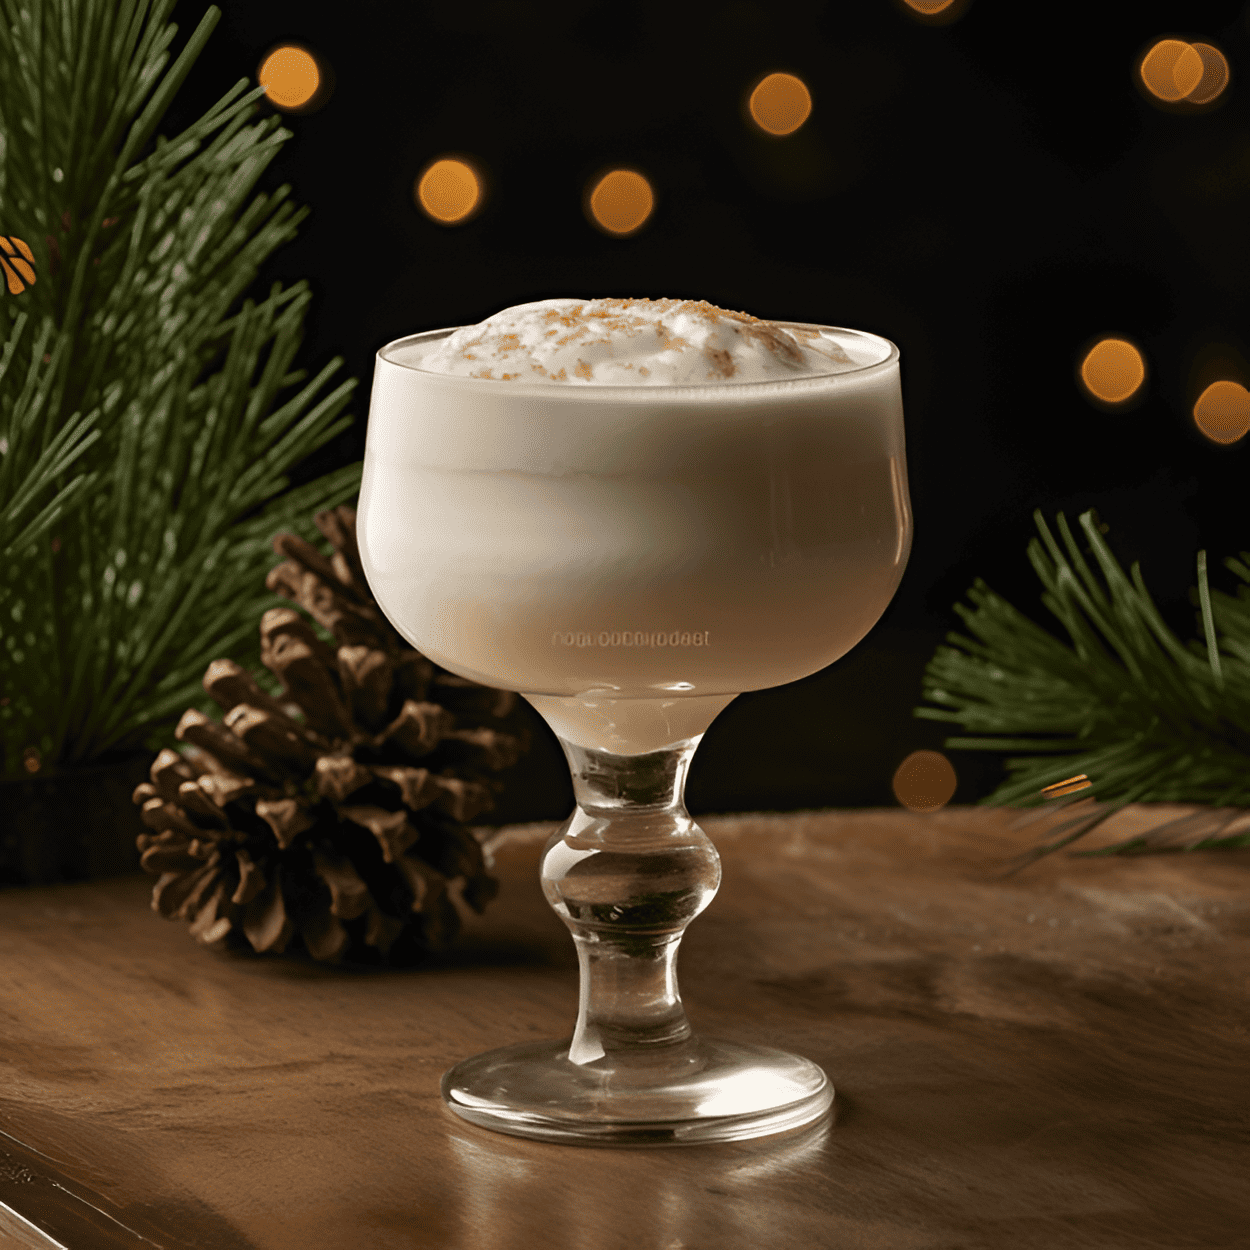 Melted Snowman Cocktail Recipe - The Melted Snowman is a creamy, sweet, and slightly boozy cocktail. The vanilla ice cream gives it a rich, dessert-like quality, while the vodka and coffee liqueur add a warming kick.